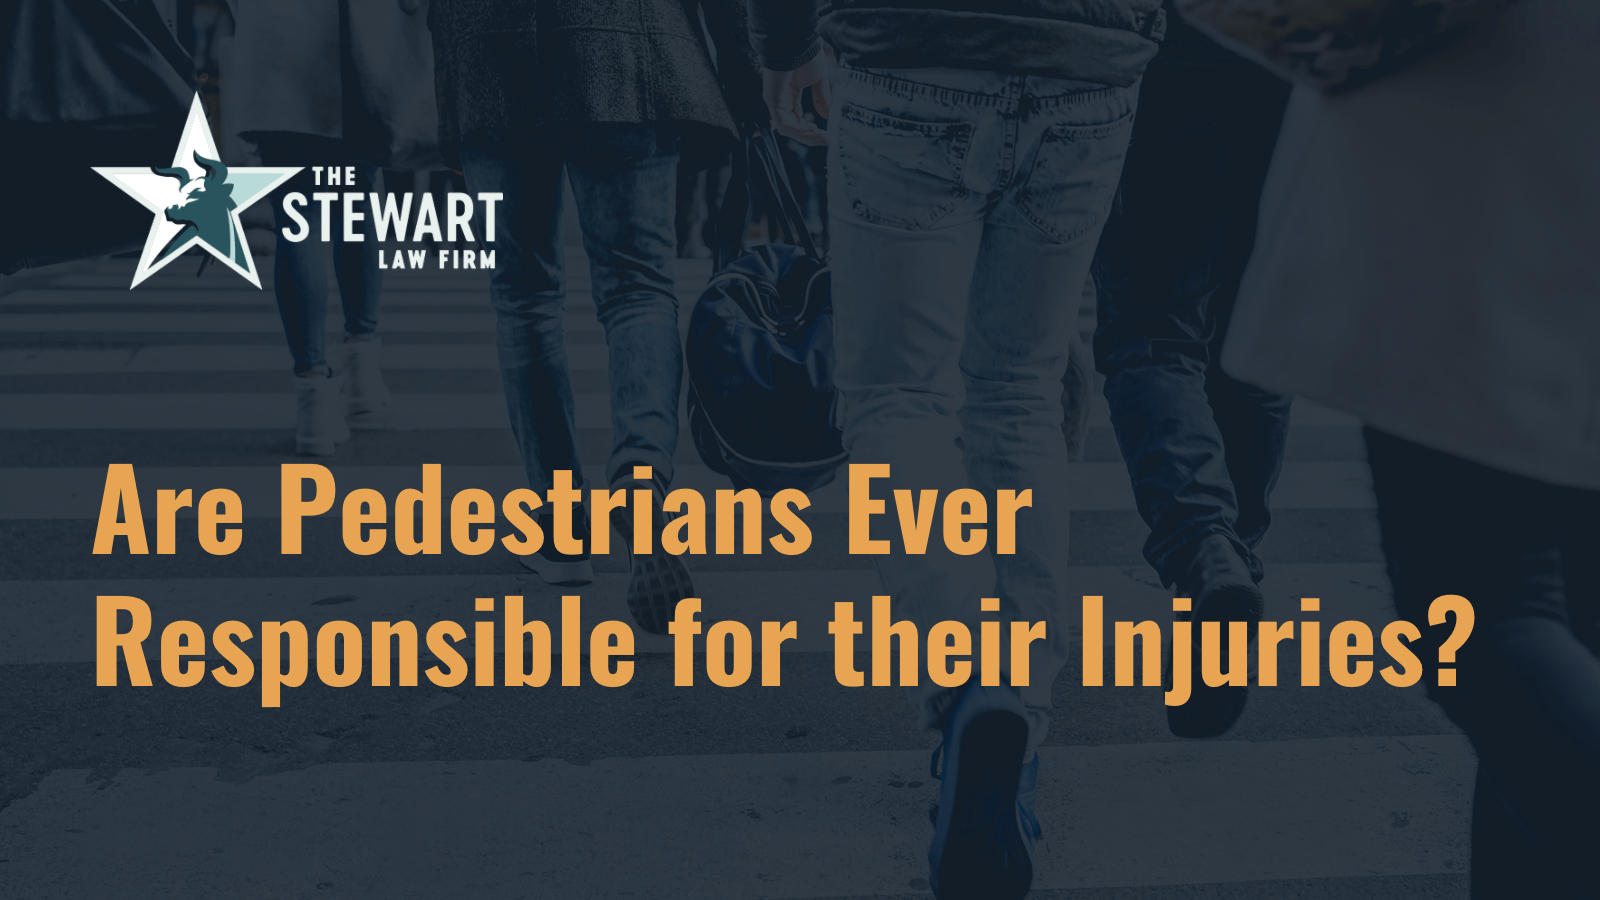 Are Pedestrians Ever Responsible for their Injuries - the stewart law firm - austin texas personal injury lawyer